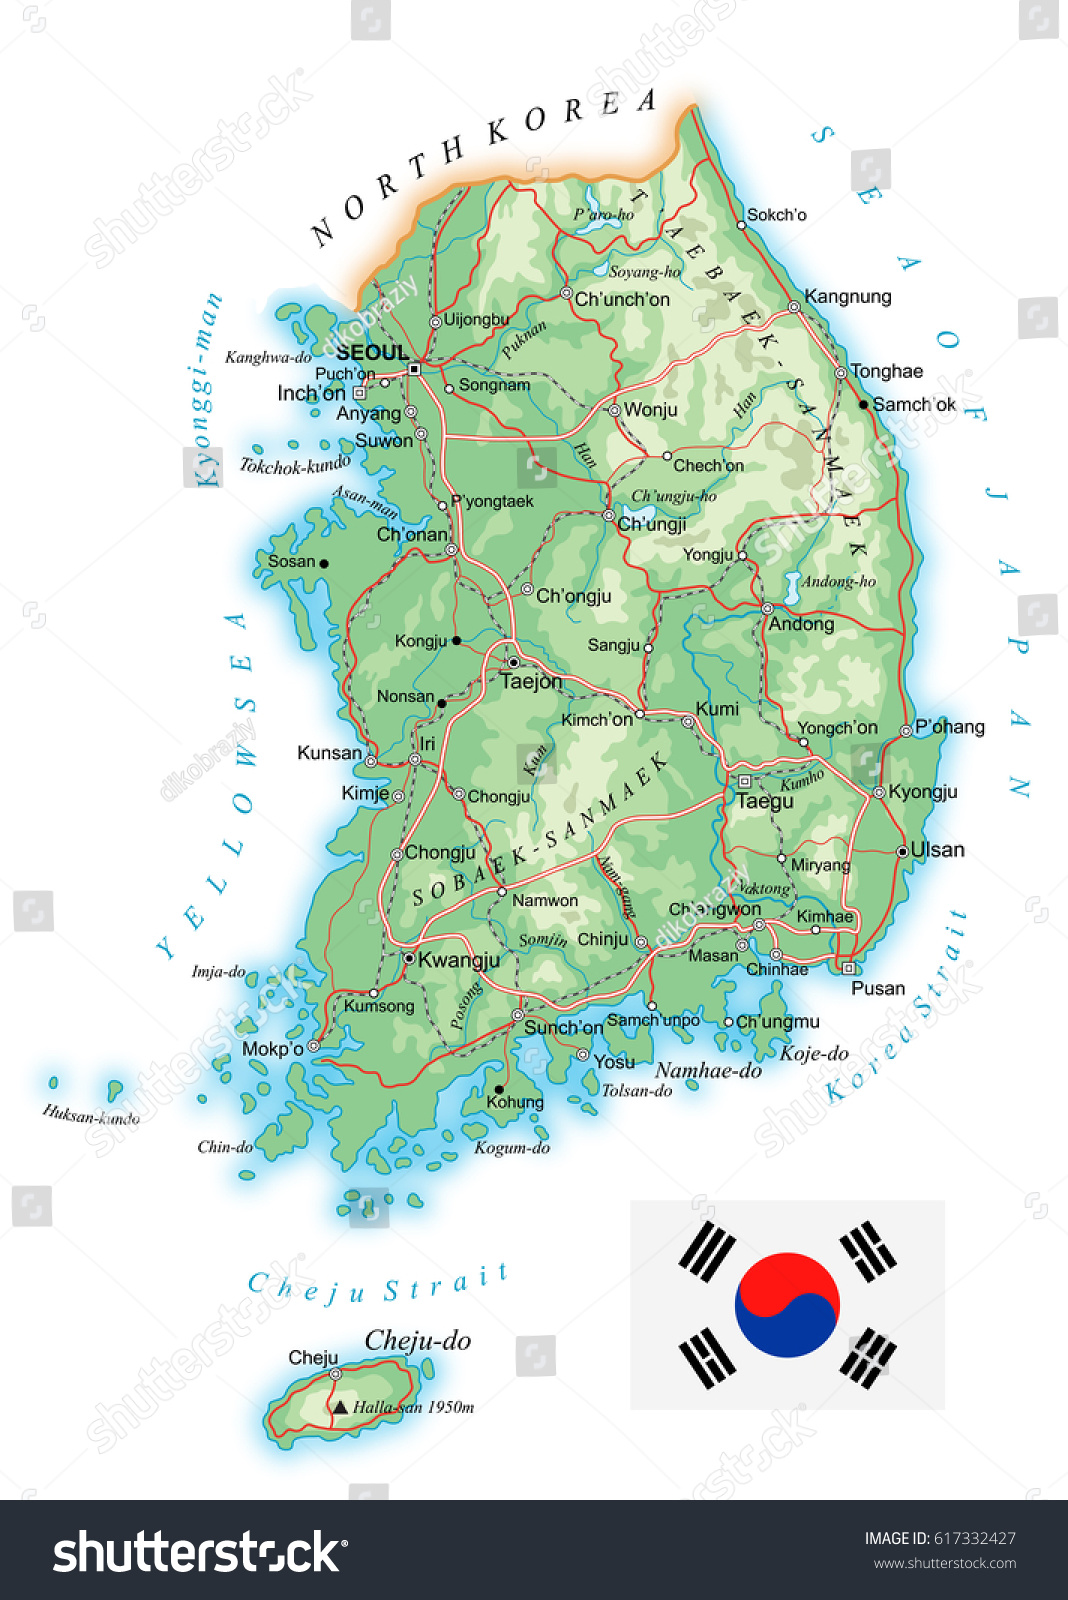 South Korea Topographic Map South Korea Detailed Topographic Map Vector Stock Vector (Royalty Free)  617332427 | Shutterstock